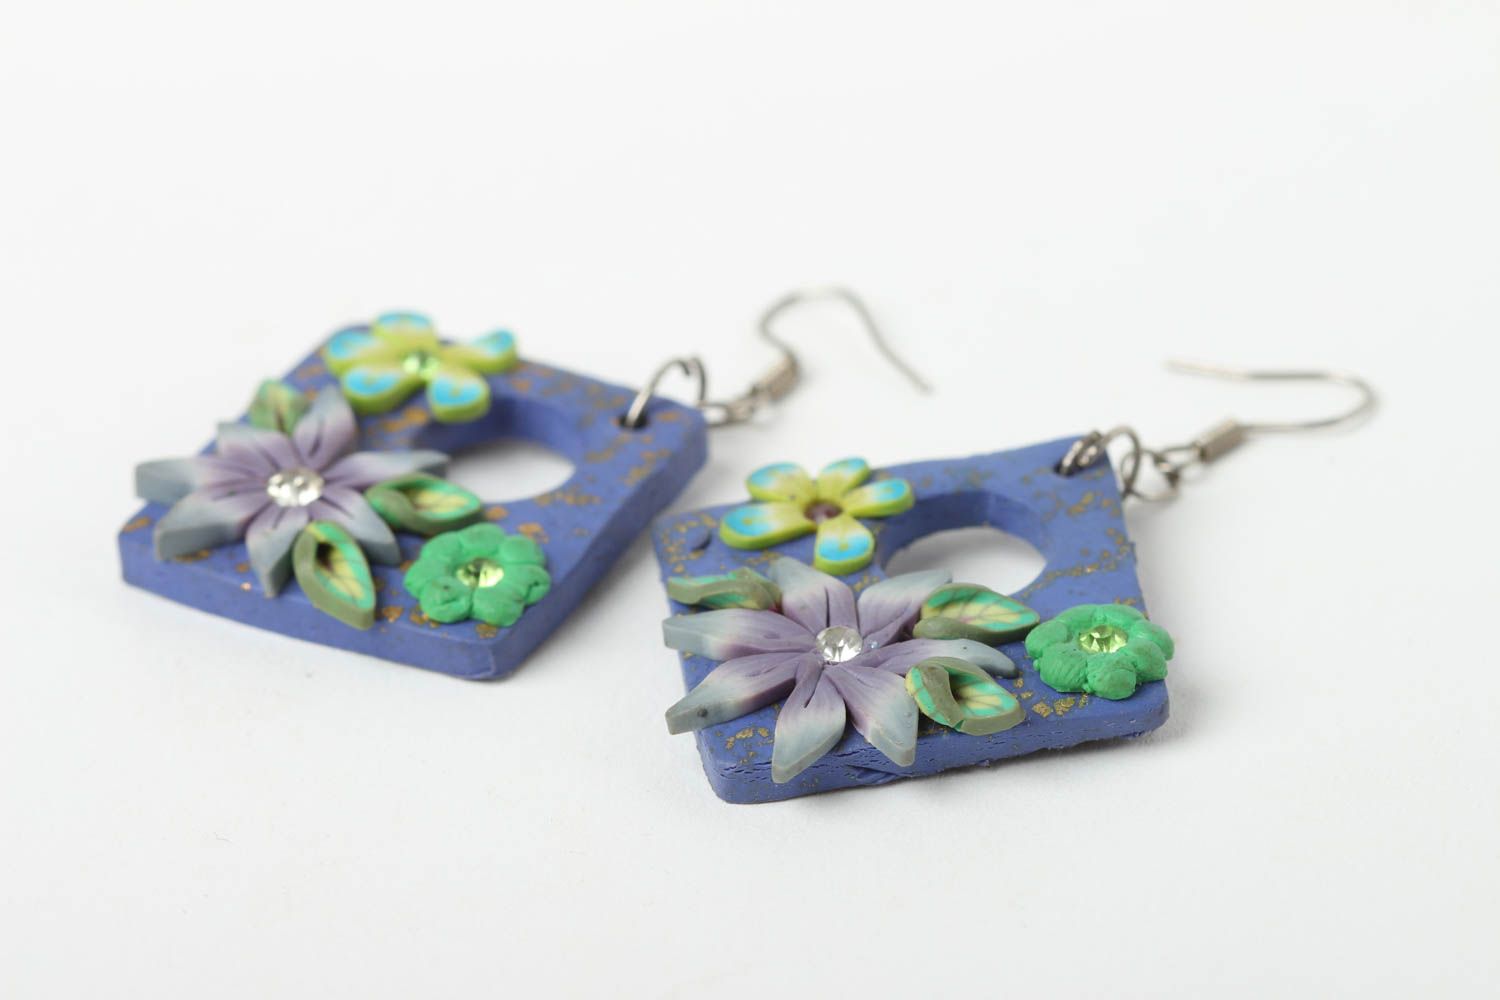 Plastic earrings handmade polymer clay earrings with charms designer jewelry photo 3